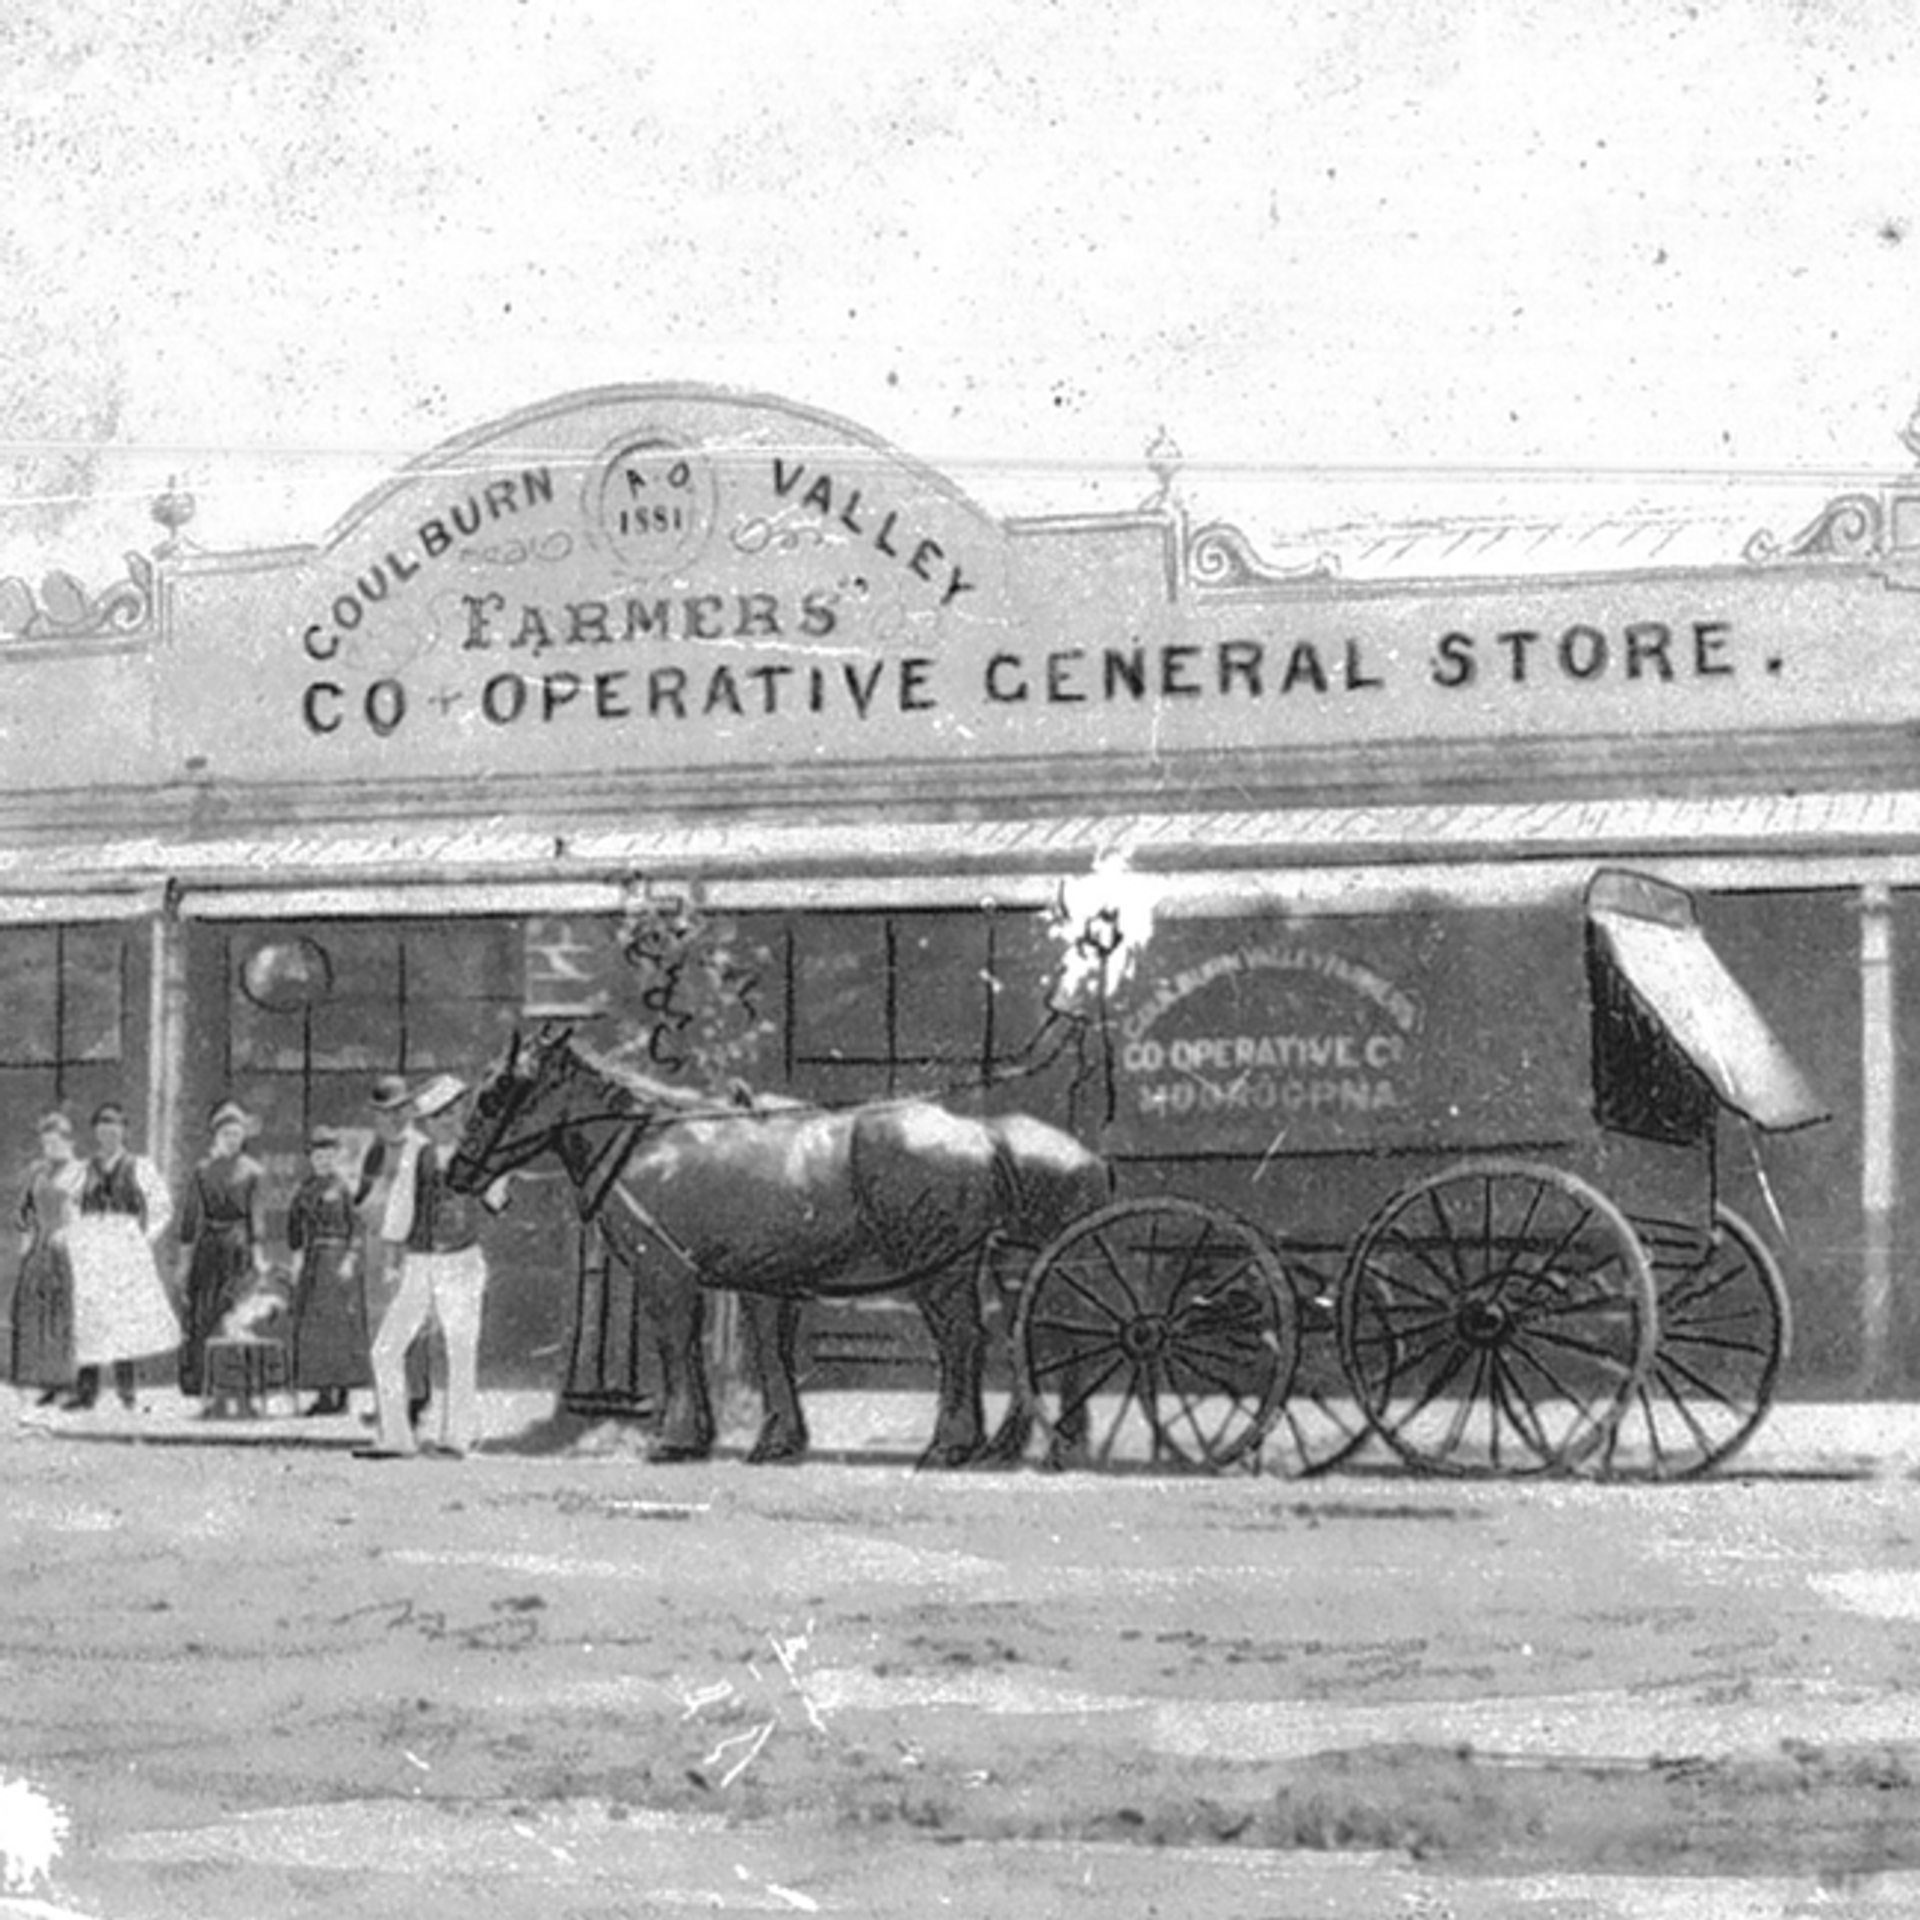 Grainy black and white photograph of horse carriage in front of Goulburn Valley Farmers’ Co-Operative General Store